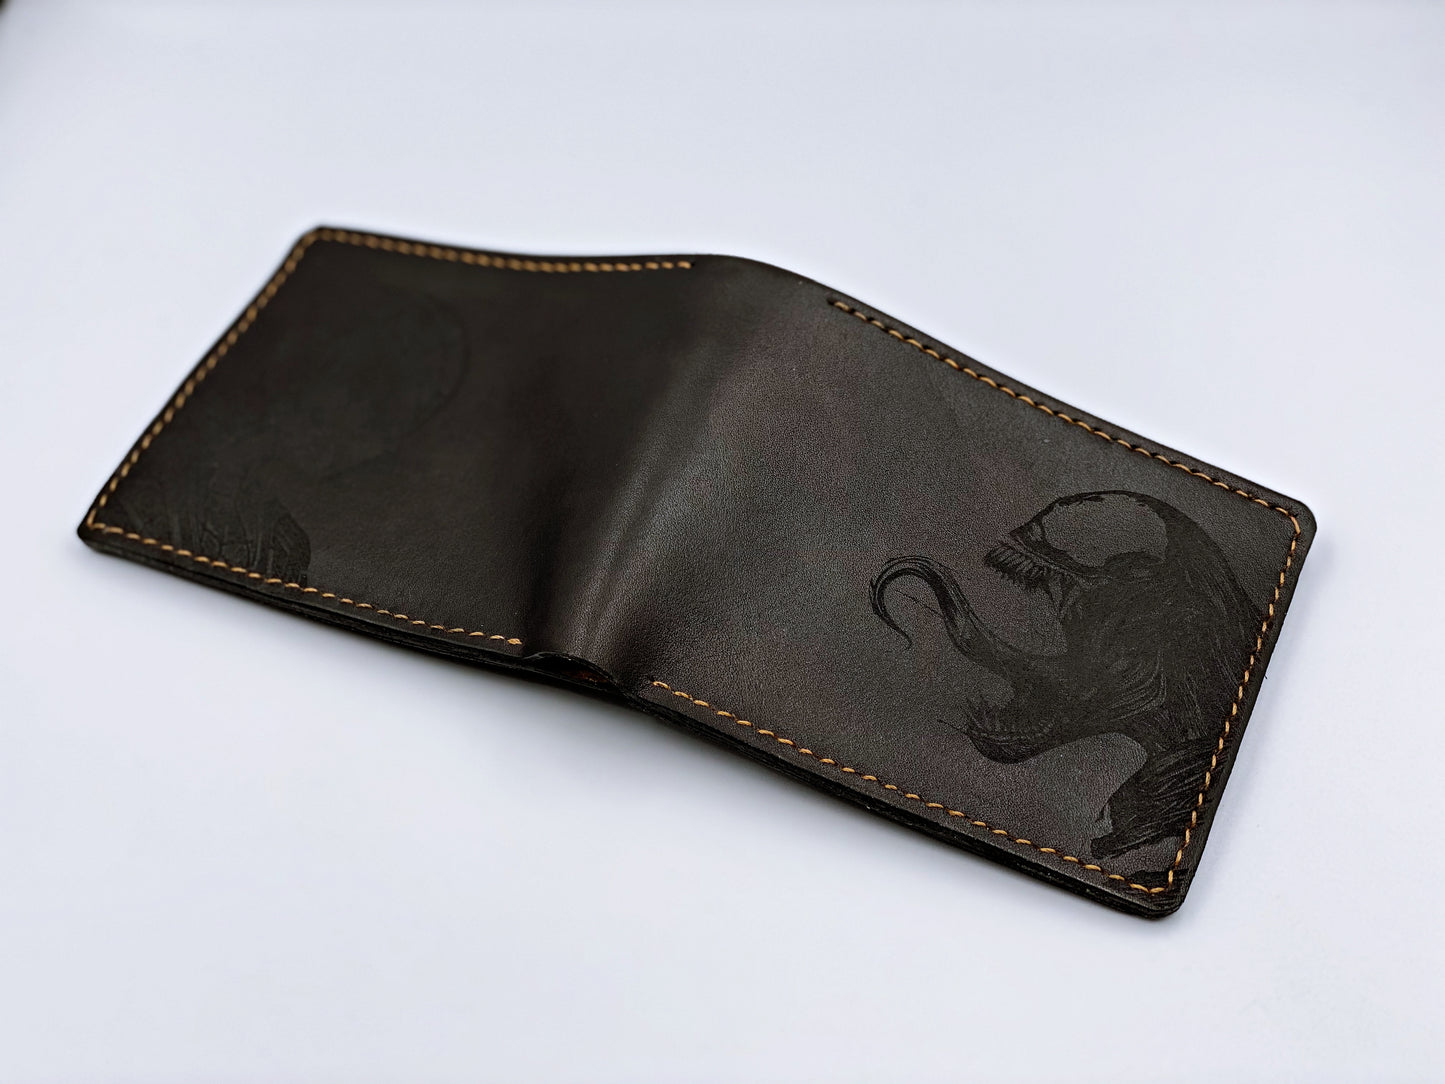 Mayan Corner - Venom spiderman leather handmade men's wallet, custom superheroes gifts for him, father's day gifts